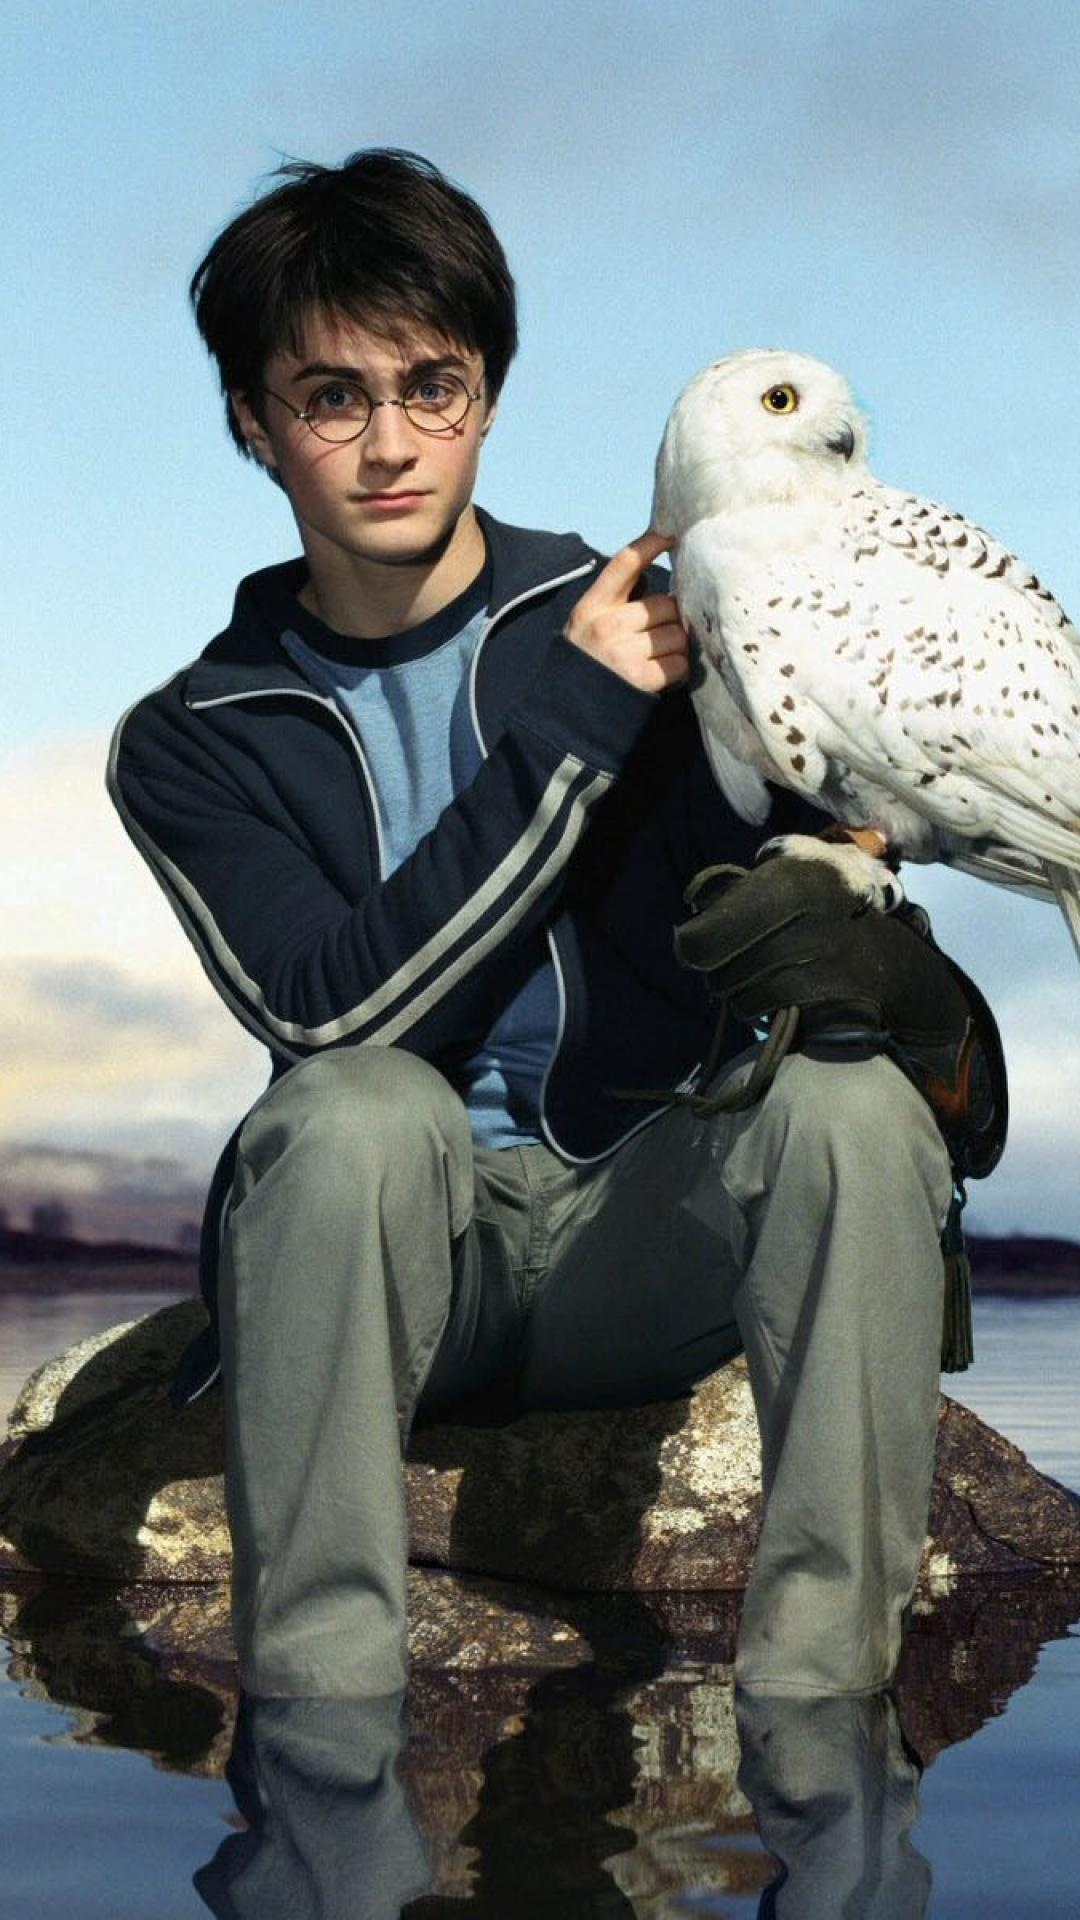 Hedwig: Brought Harry a brand-new copy of Advanced Potion-Making from Flourish and Blotts. 1080x1920 Full HD Wallpaper.